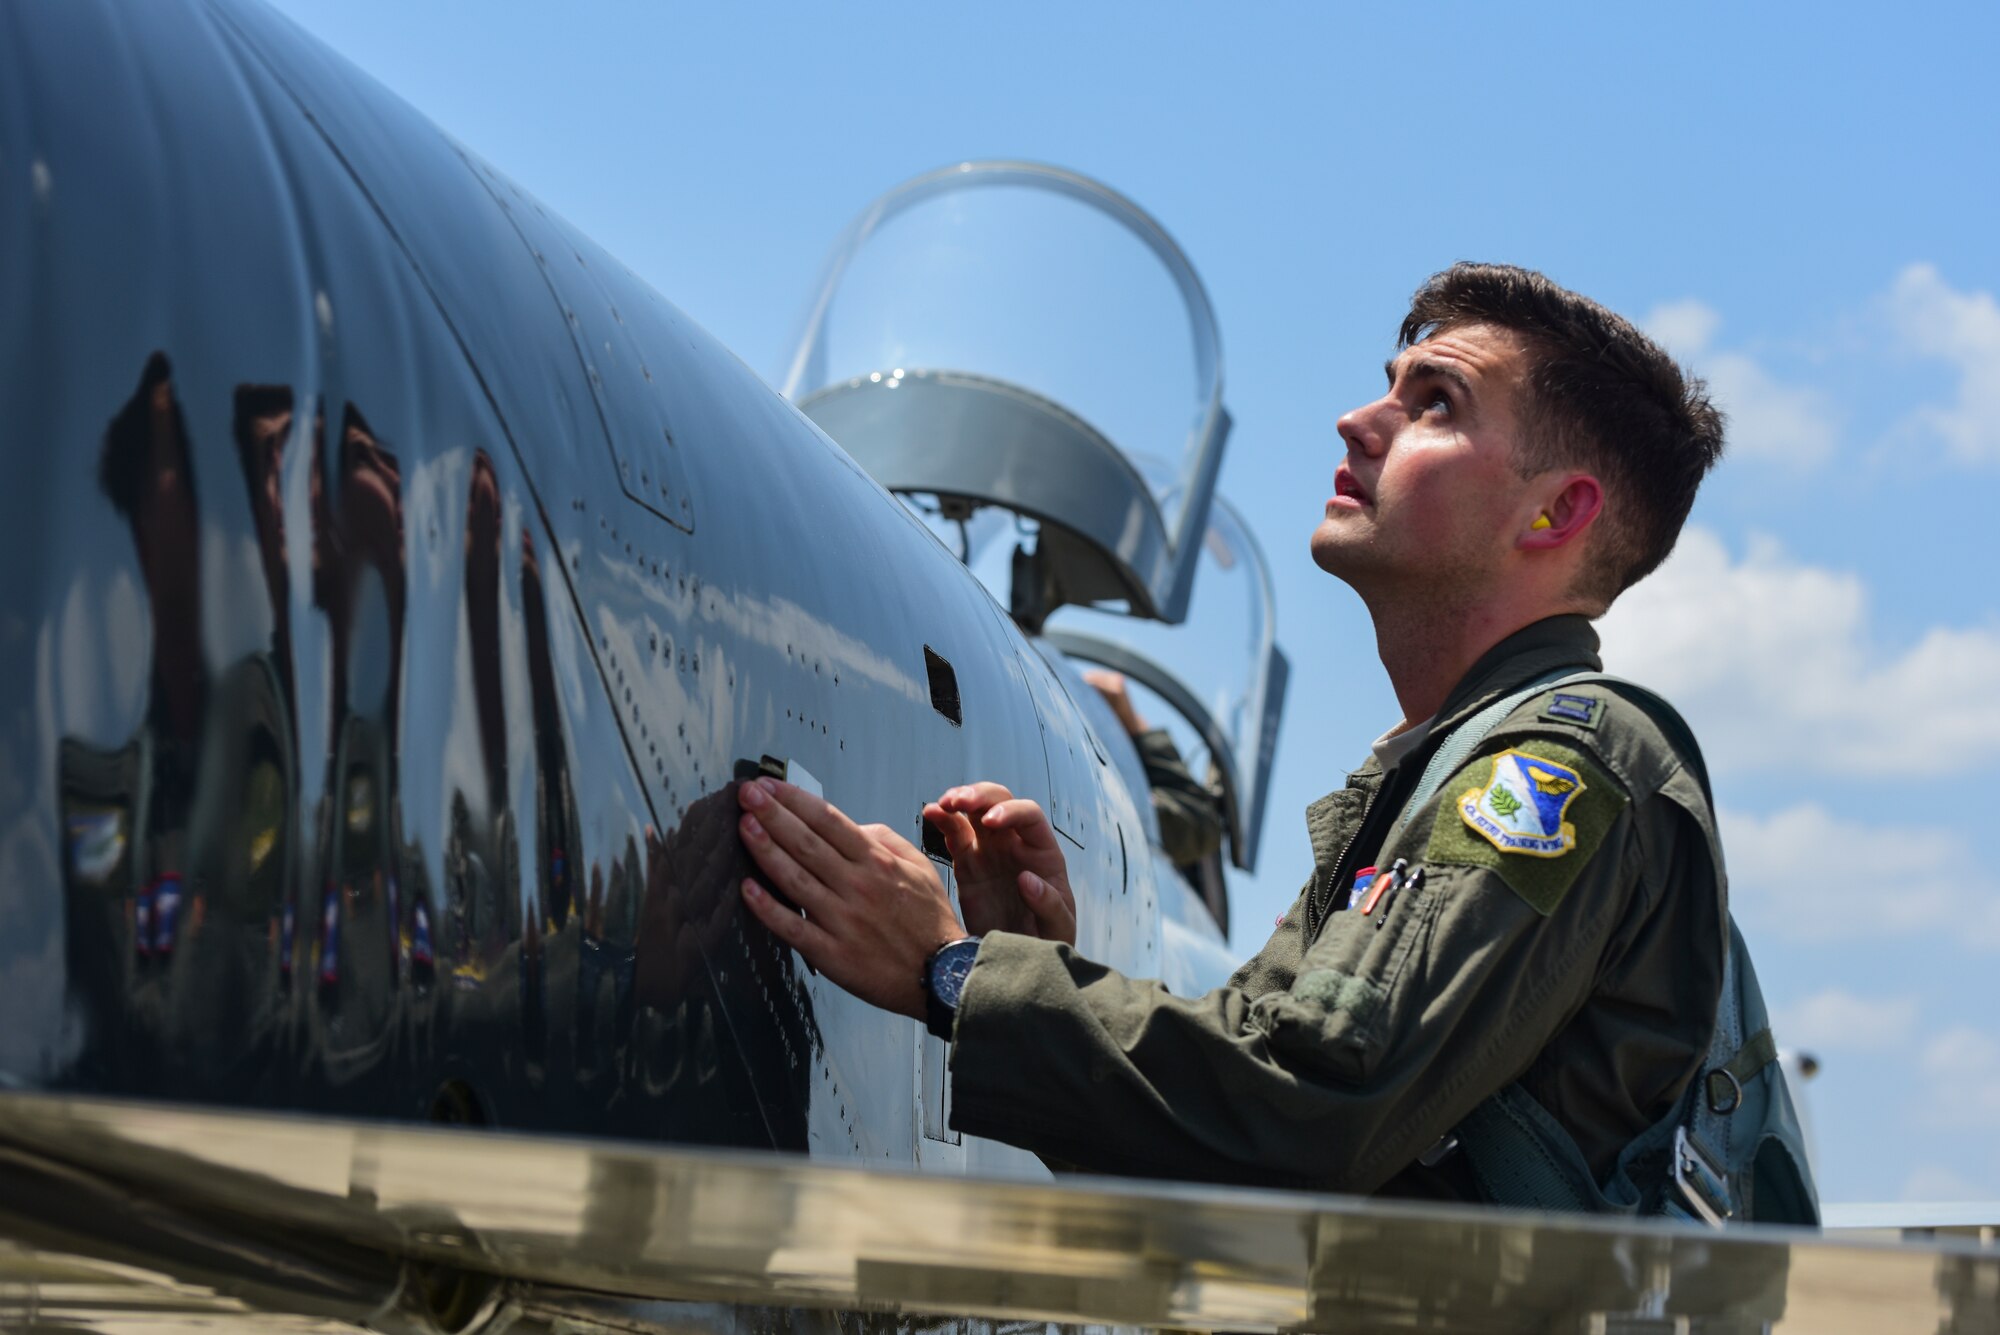 Capt. Mark Palyok, 87th Flying Training Squadron assistant flight commander, inspects a T-38C Talon as preparation to depart from Laughlin Air Force Base, Texas, to fly in a dissimilar formation of aircraft--one over Del Rio and Eagle Pass and the other over San Angelo--on May 21, 2020. The flyover consisted of the T-6A Texan II, T-1A Jayhawk and the T-38 and honored the men and women on the front lines of the fight against COVID-19 during the Defense Department’s #AmericaStrong salute. (U.S. Air Force photo by Senior Airman Anne McCready)